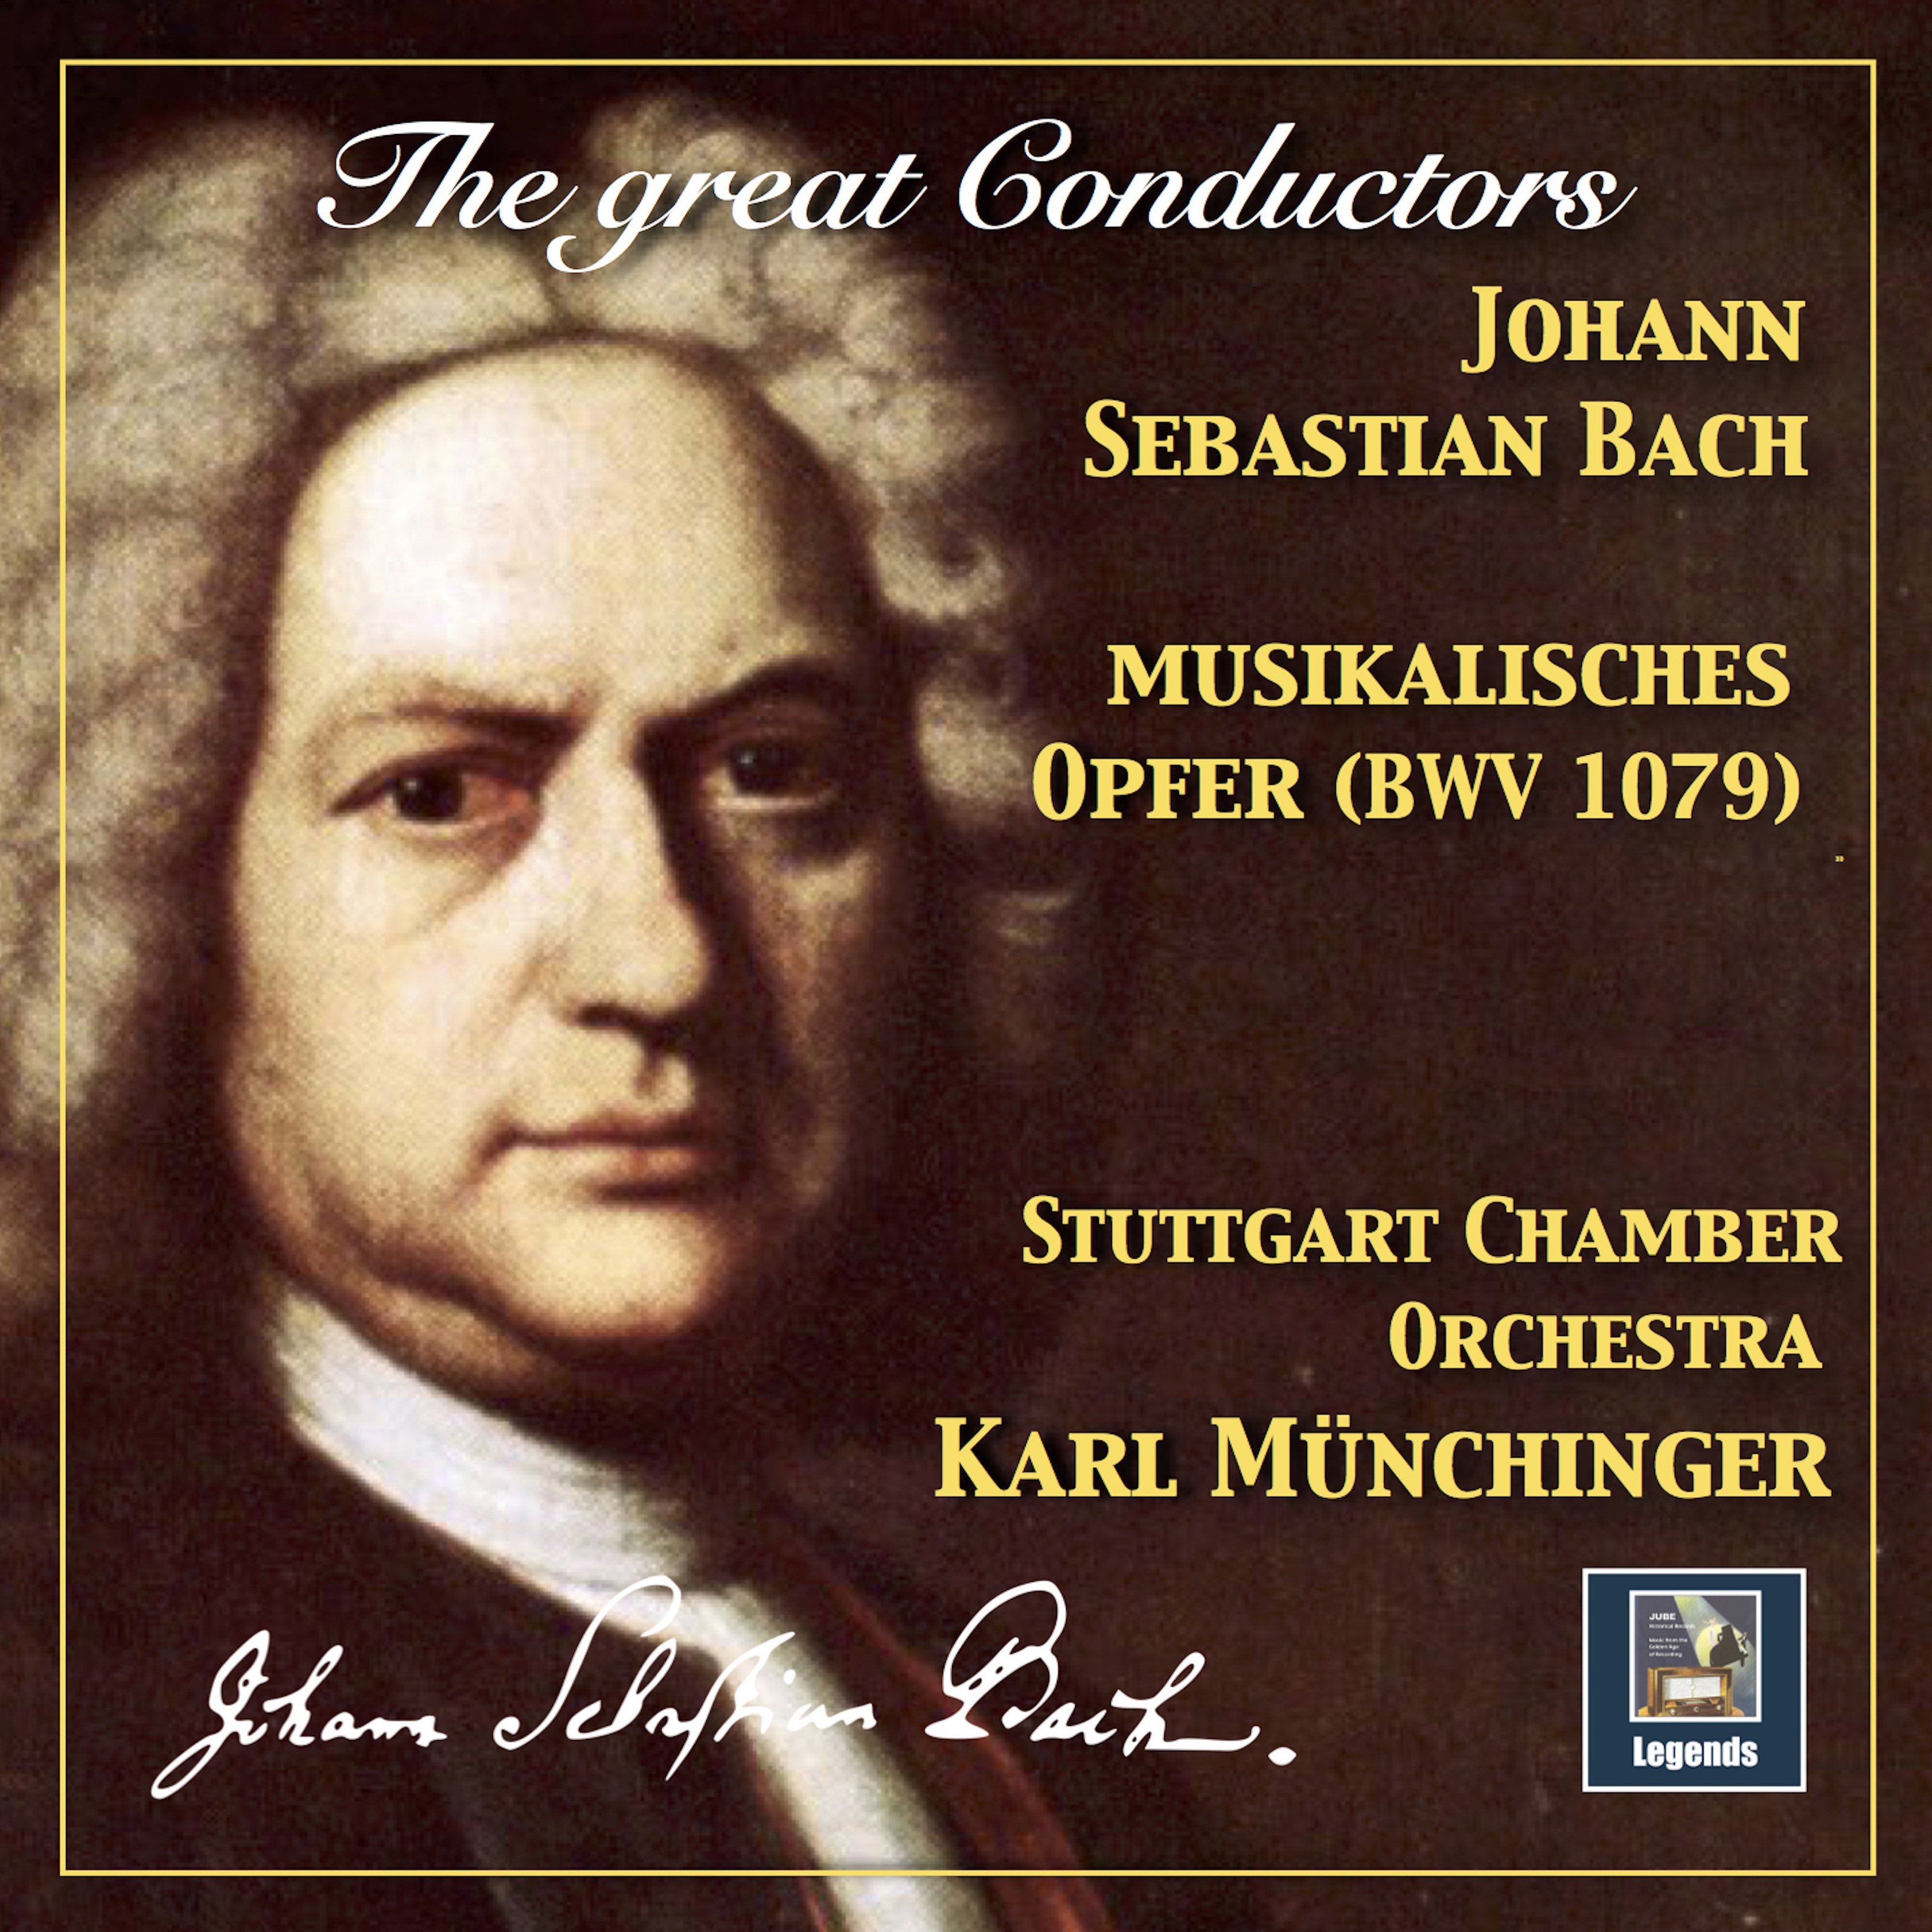 Musikalisches Opfer, BWV 1079 Arr. K. Mü nchinger for Chamber Orchestra: Canon a 2 per motum contrarium